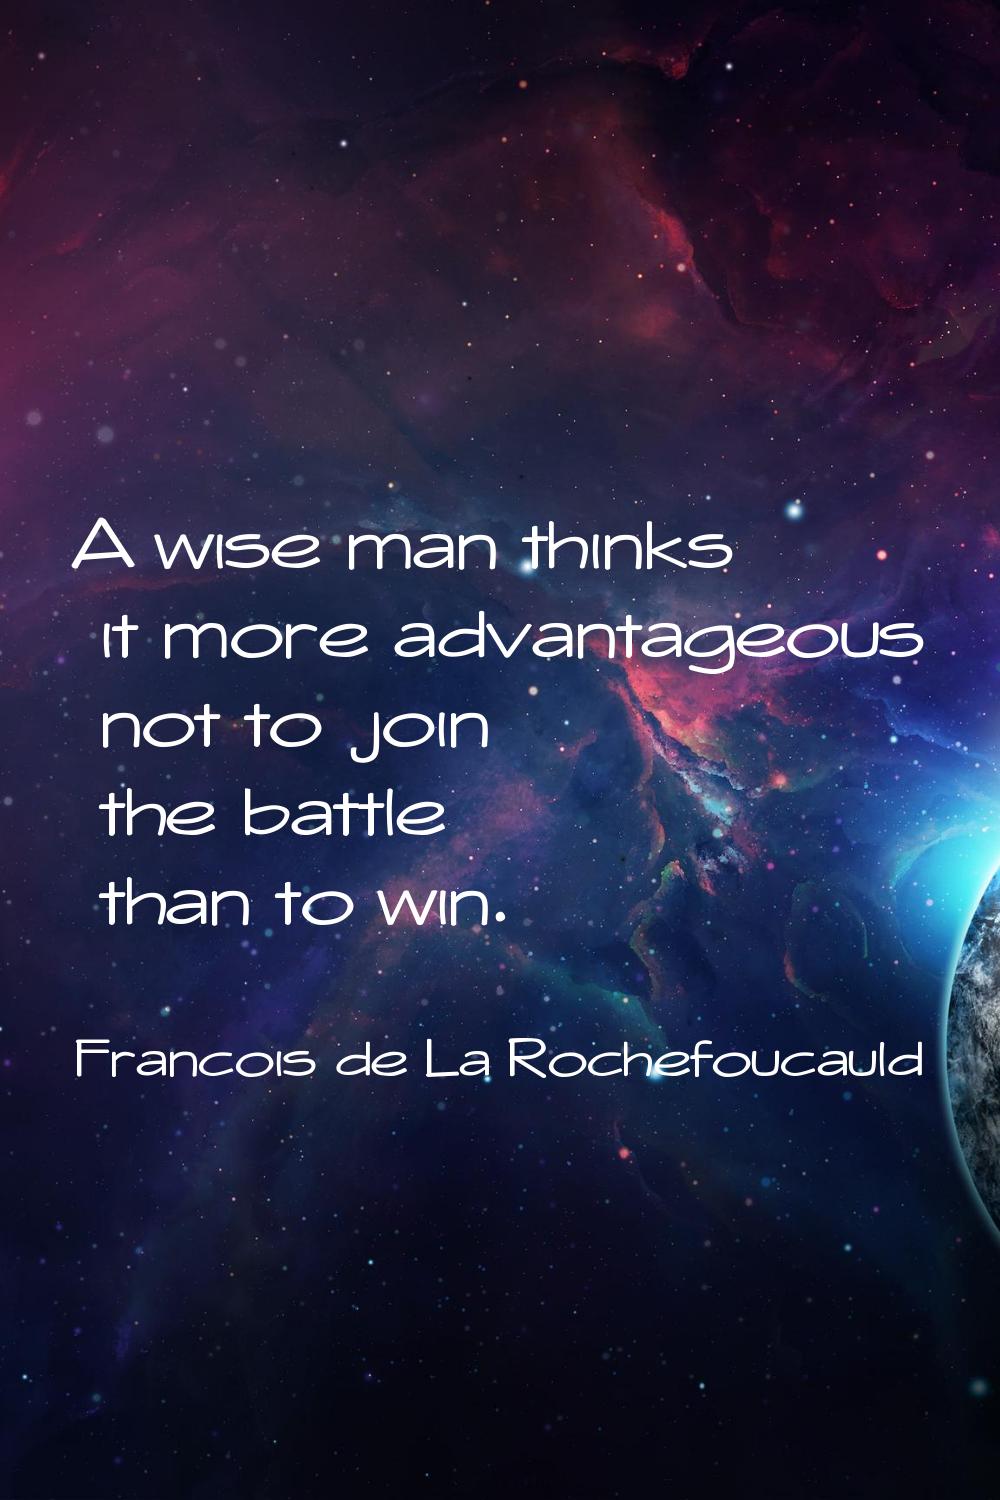 A wise man thinks it more advantageous not to join the battle than to win.